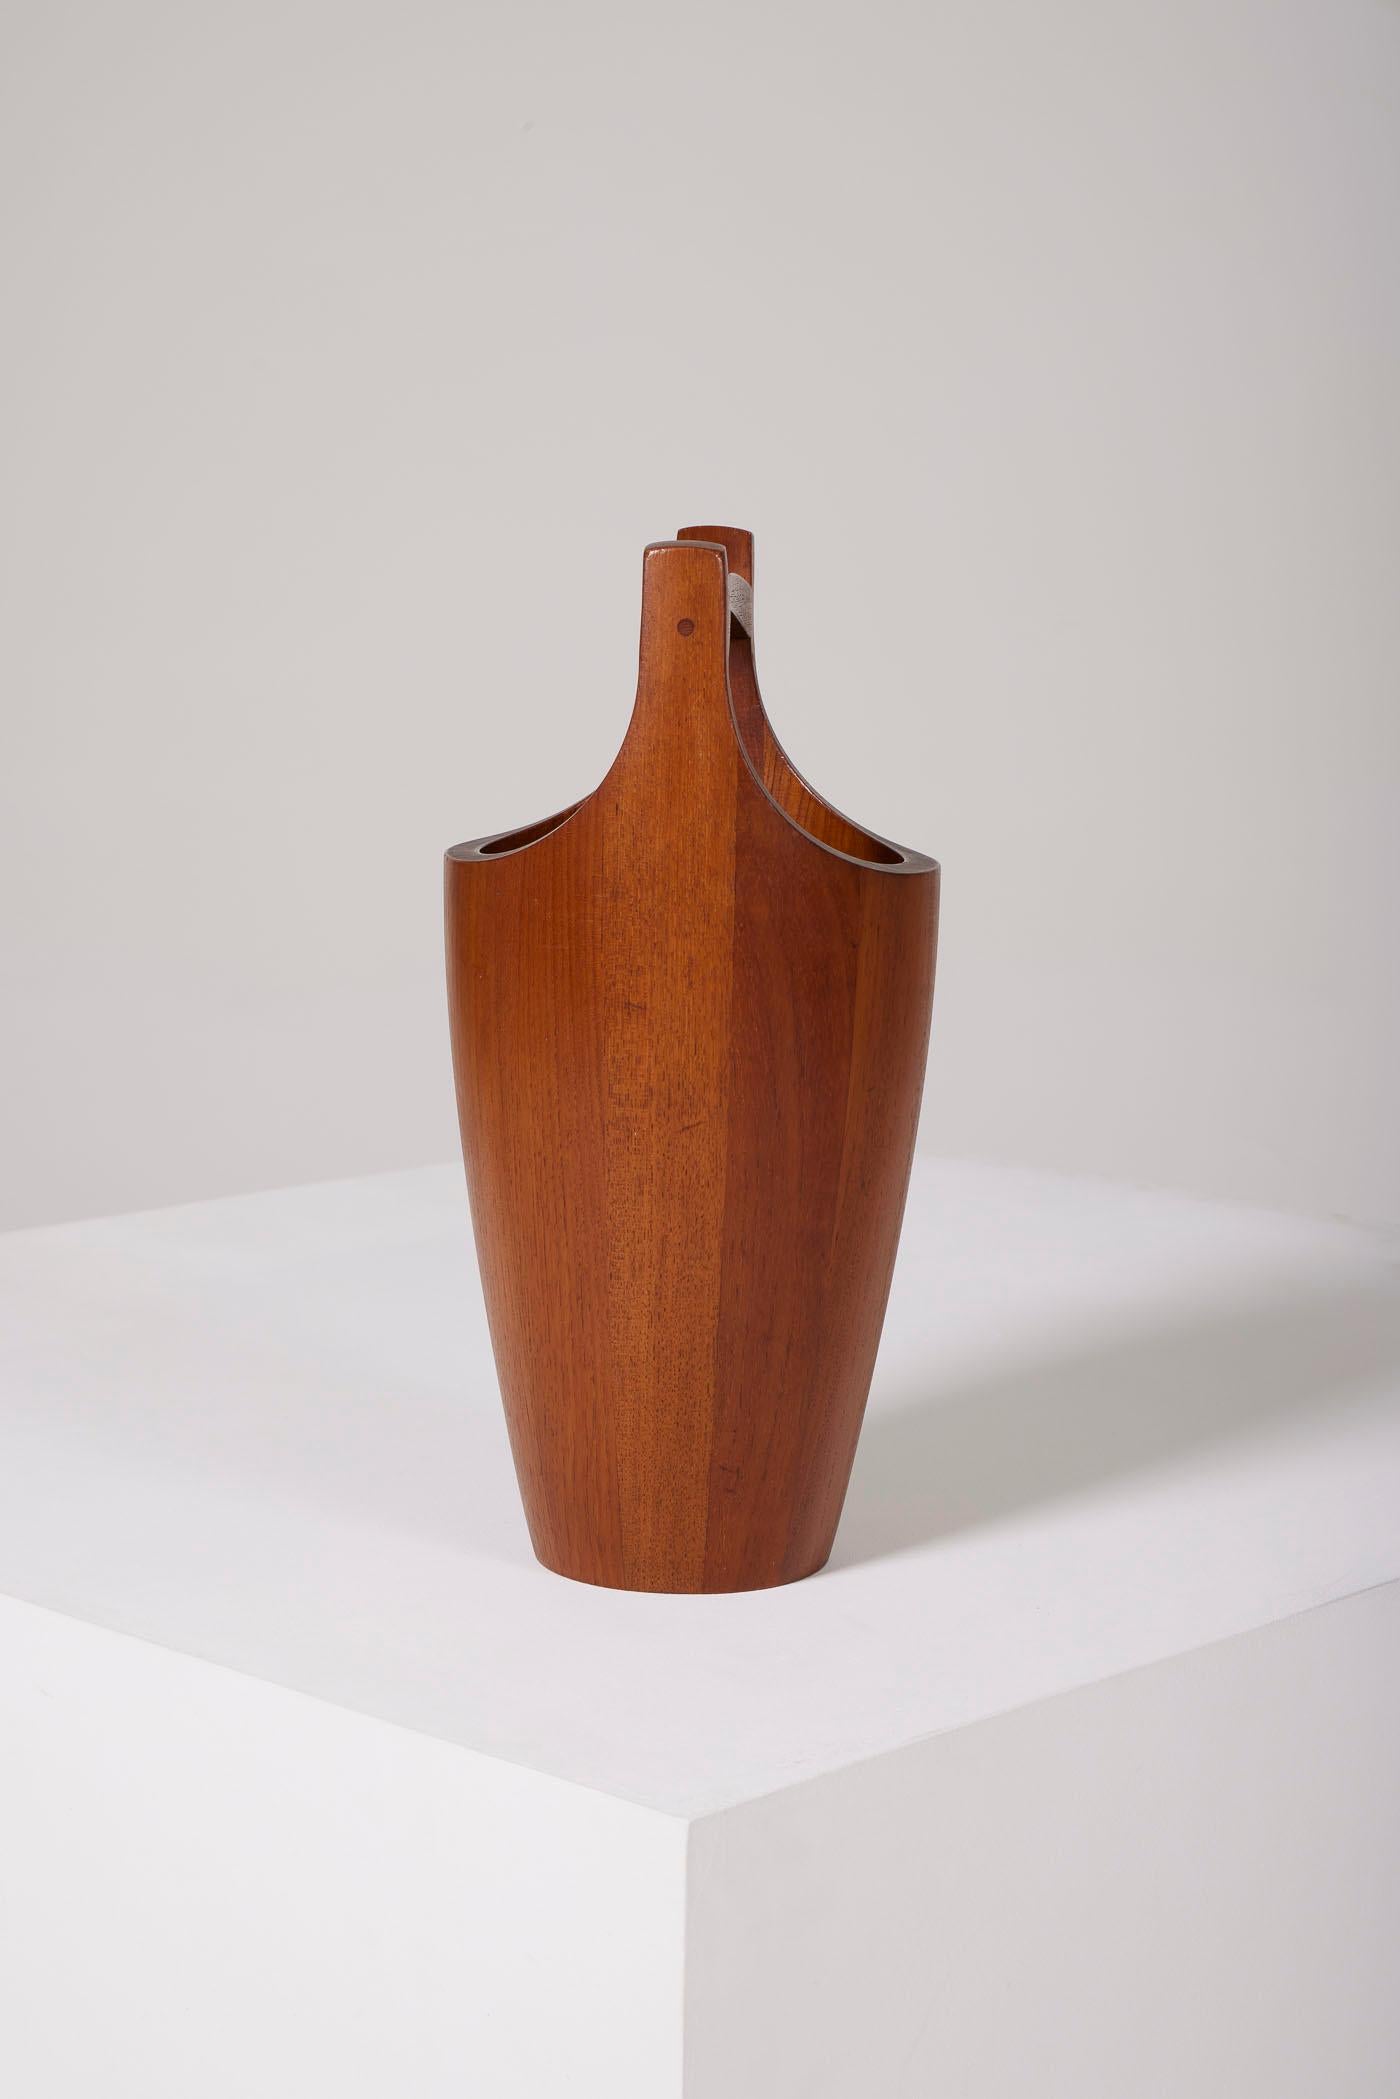 Ice bucket in wood by Jens Quitsgaard For Sale 2